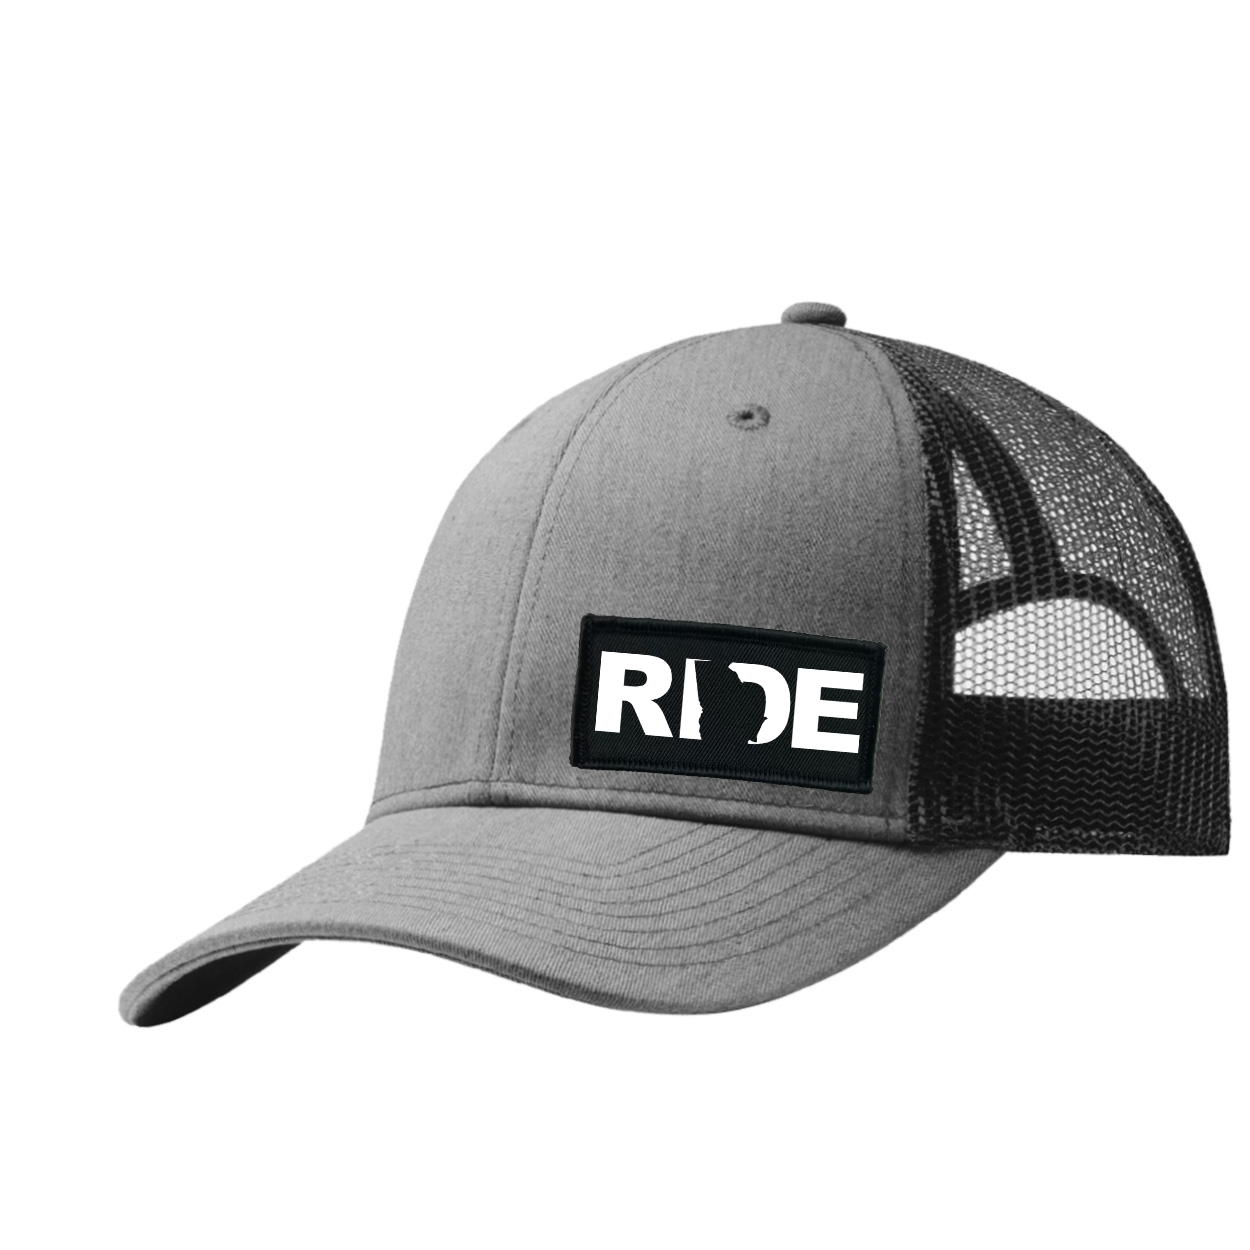 Ride Georgia Night Out Woven Patch Snapback Trucker Hat Heather Gray/Black (White Logo)